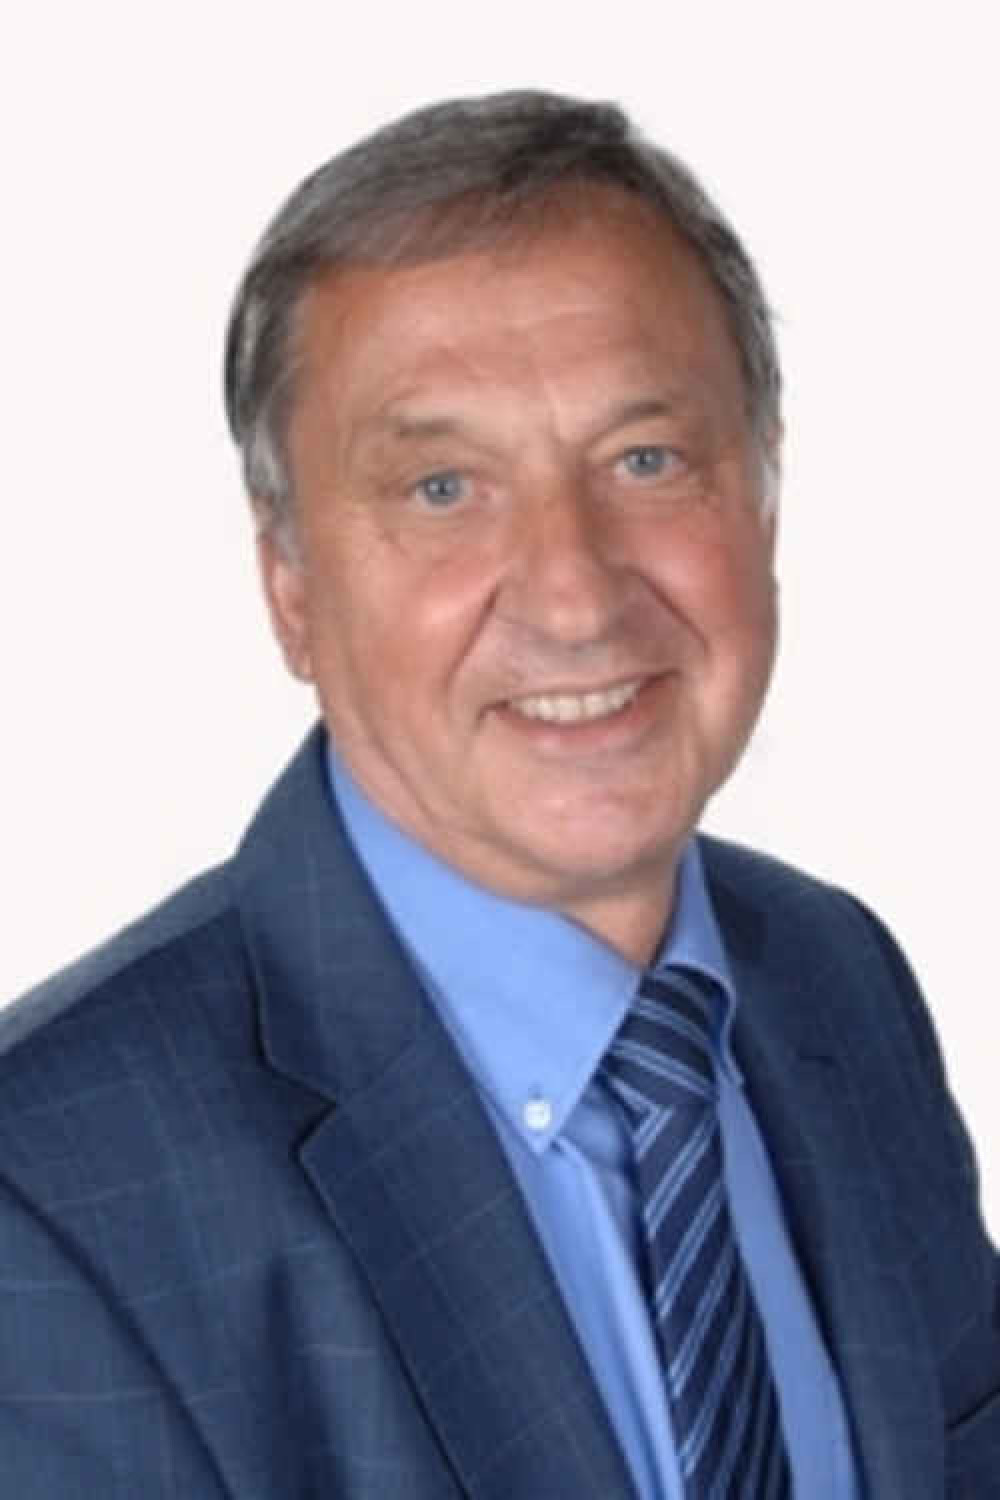 Councillor Neil Moore, leader of the Vale of Glamorgan Council